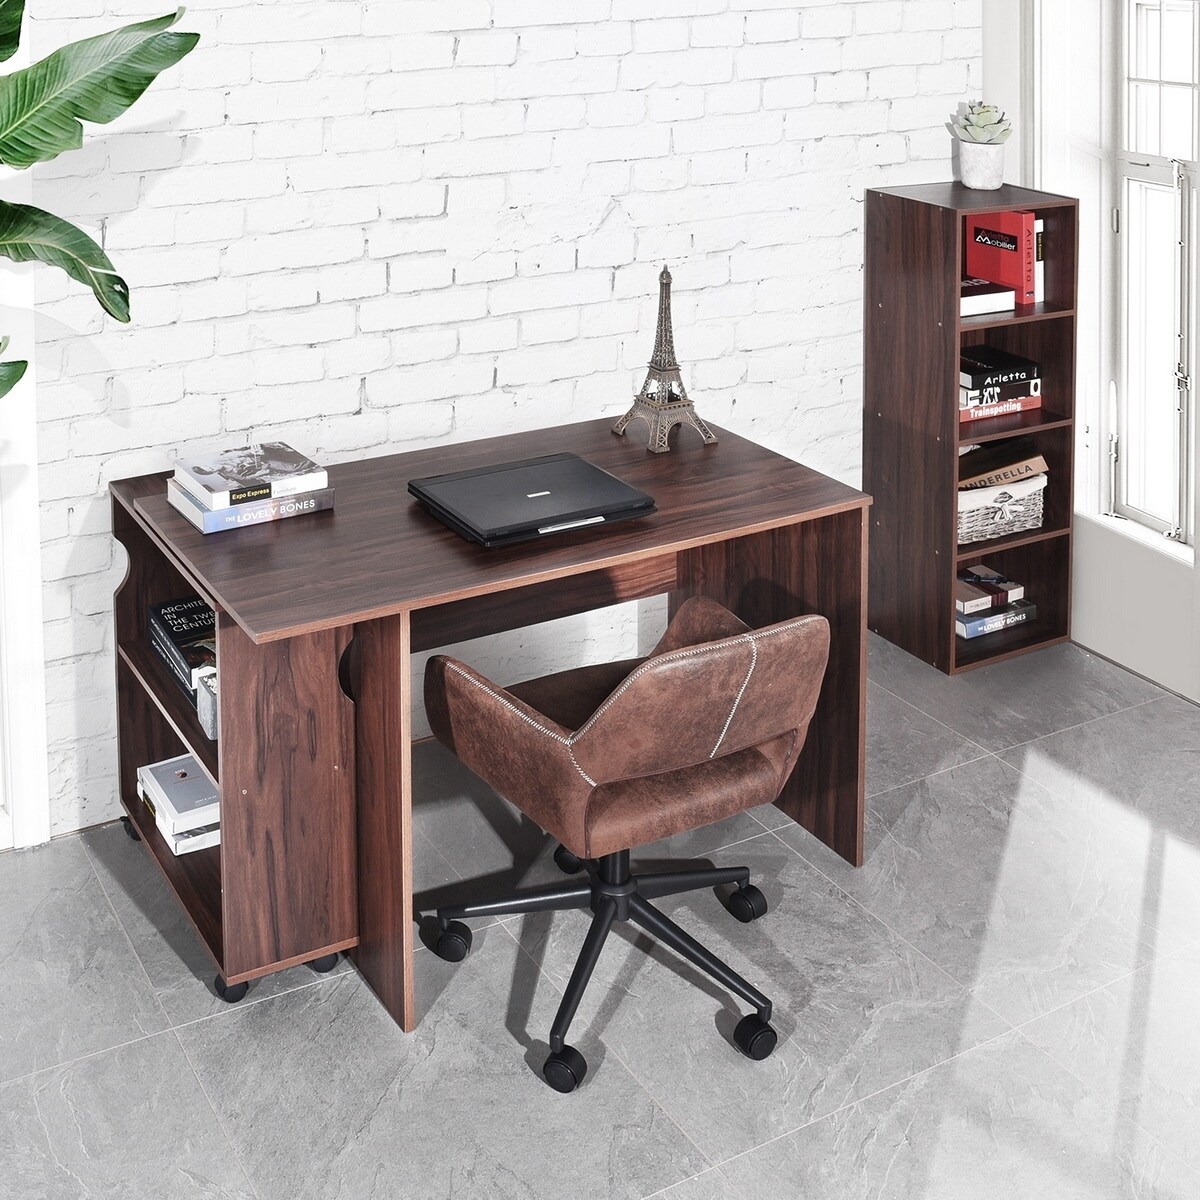 48 inch Computer Desk with Keyboard Tray, Modern Home Office Desk with Shelf & Drawers, Study Desk for Student, Rustic Brown, Size: 47